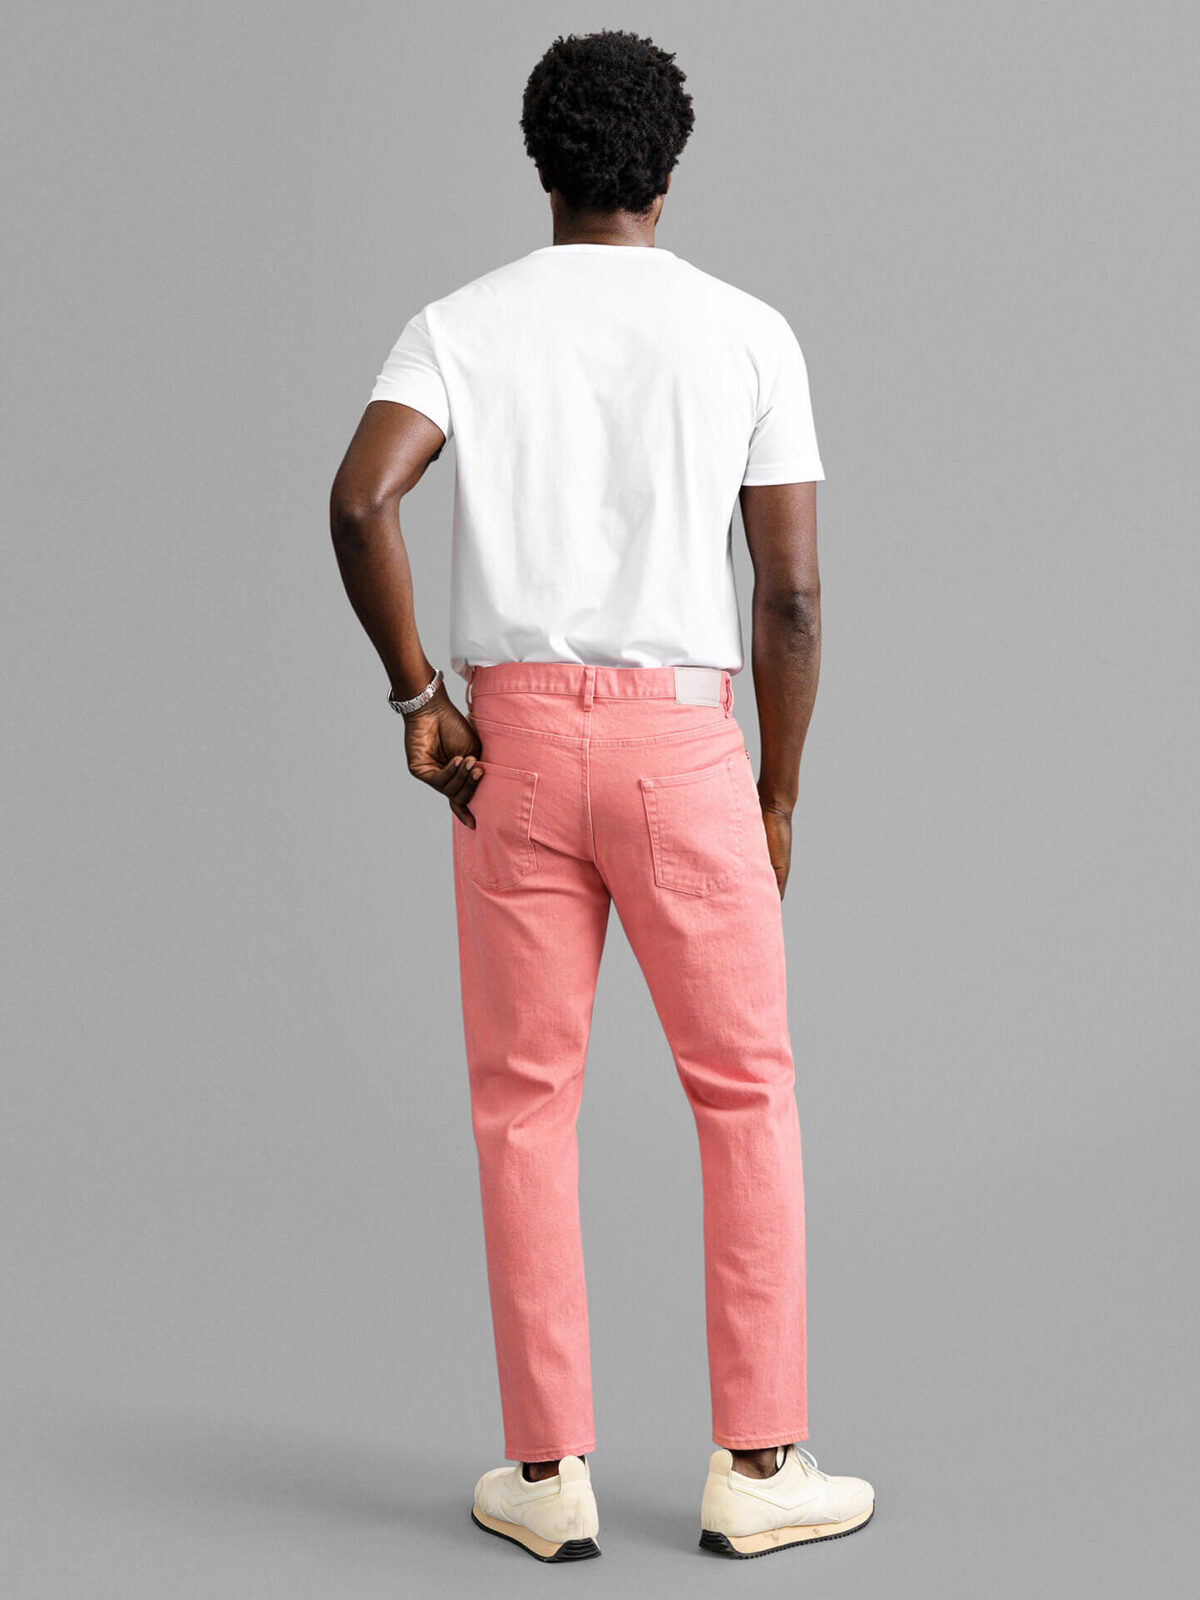 Japanese Guava Delave Stretch Jeans - Custom Fit Pants